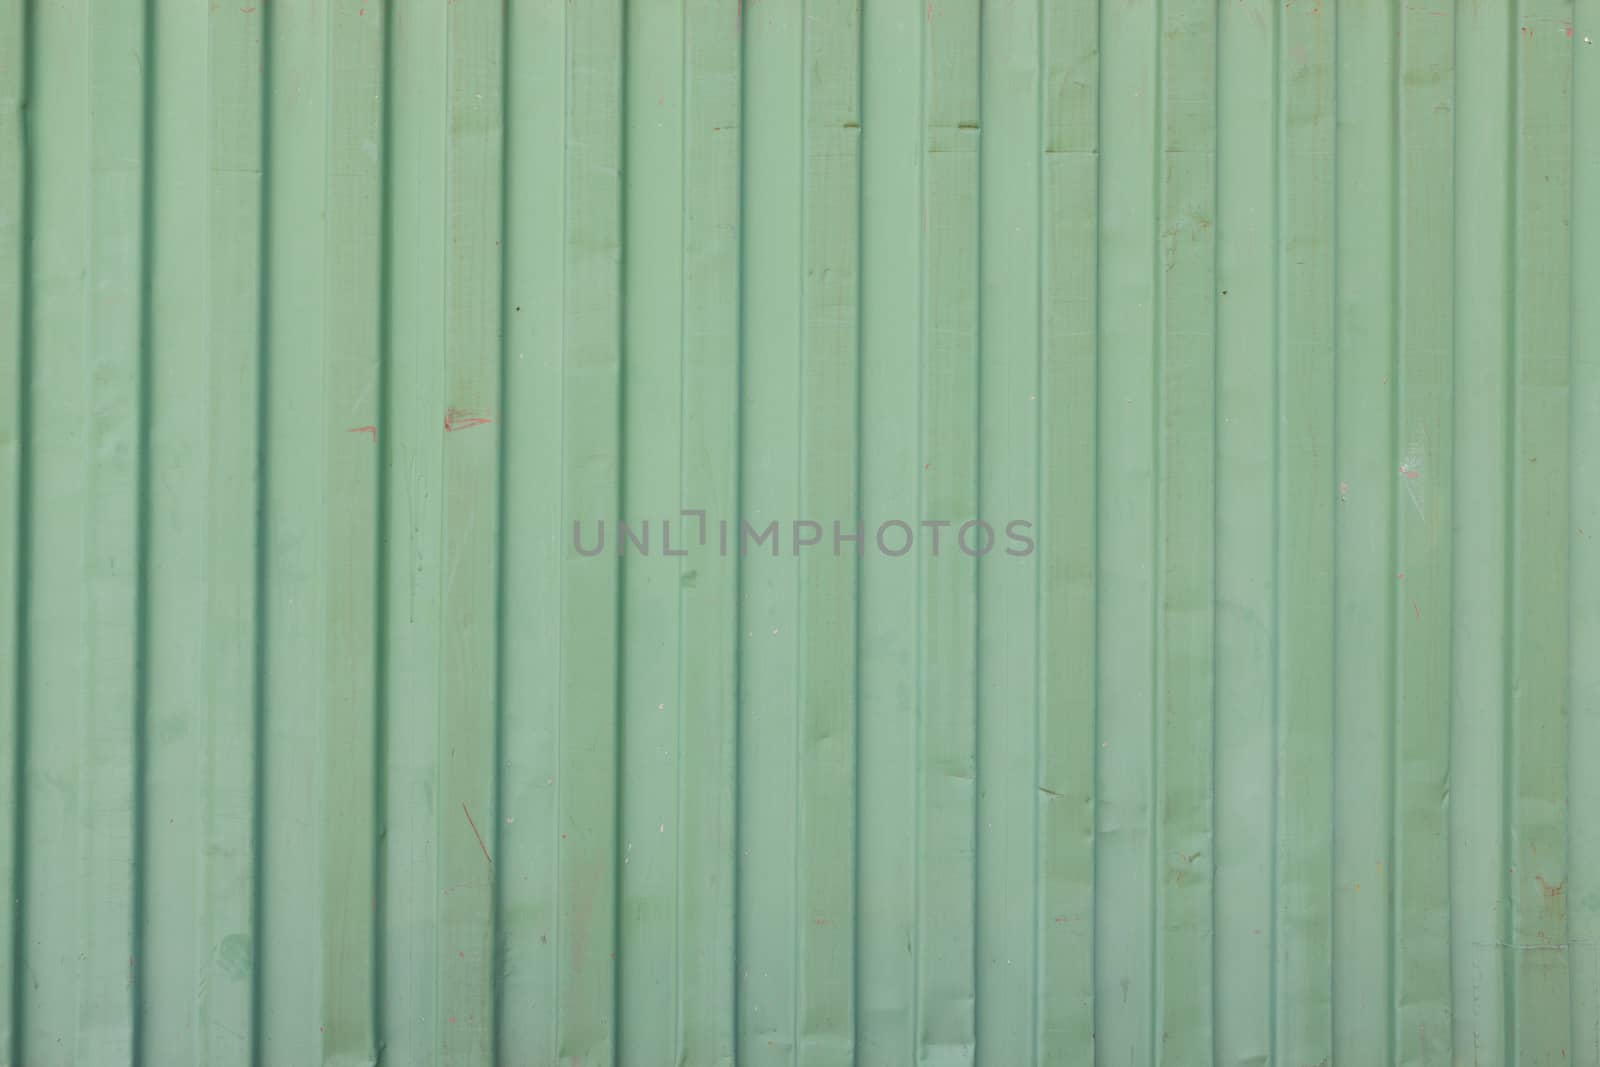 Green shipping container stripe pattern